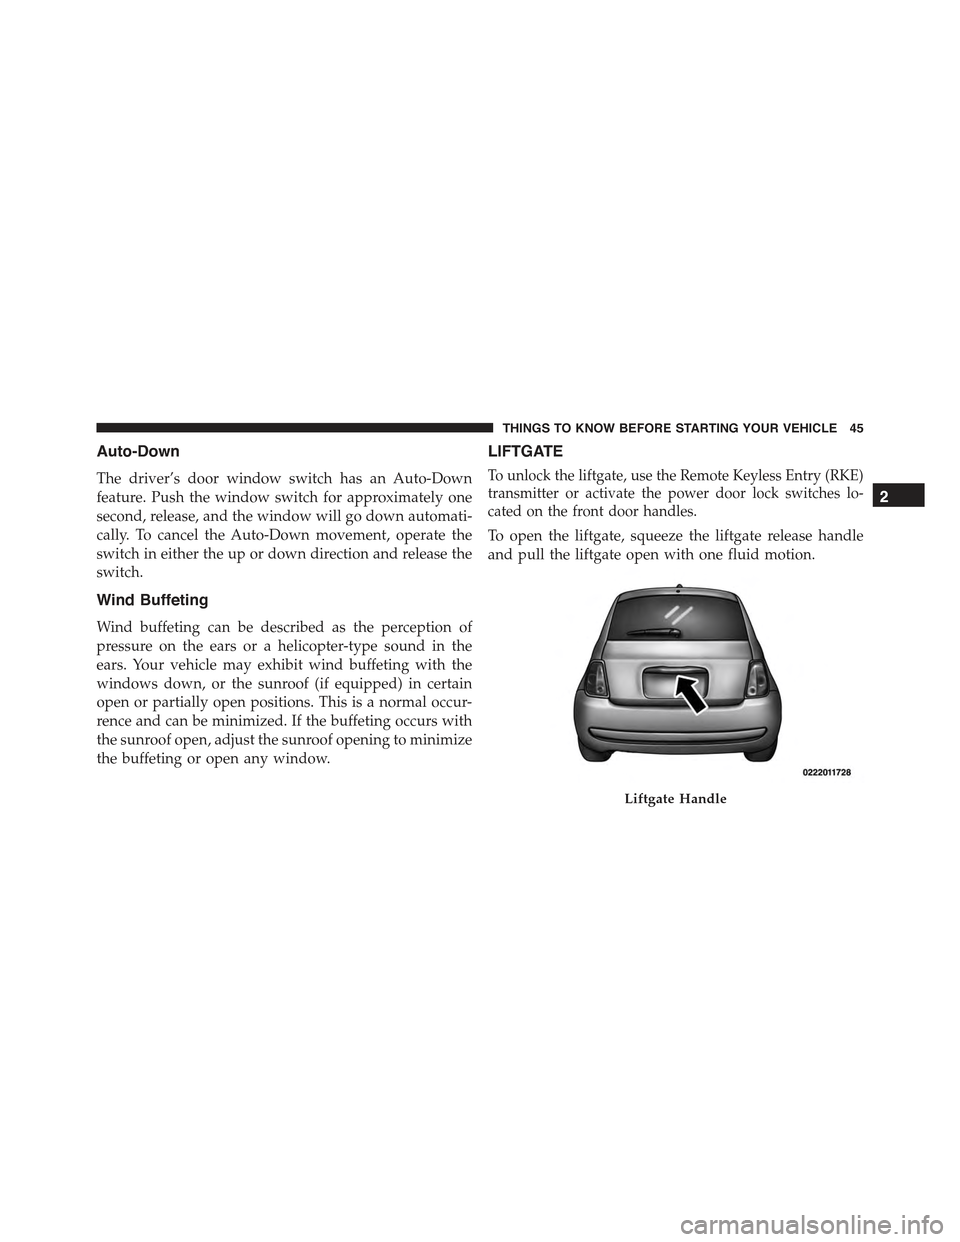 FIAT 500E 2015 2.G Service Manual Auto-Down
The driver’s door window switch has an Auto-Down
feature. Push the window switch for approximately one
second, release, and the window will go down automati-
cally. To cancel the Auto-Down